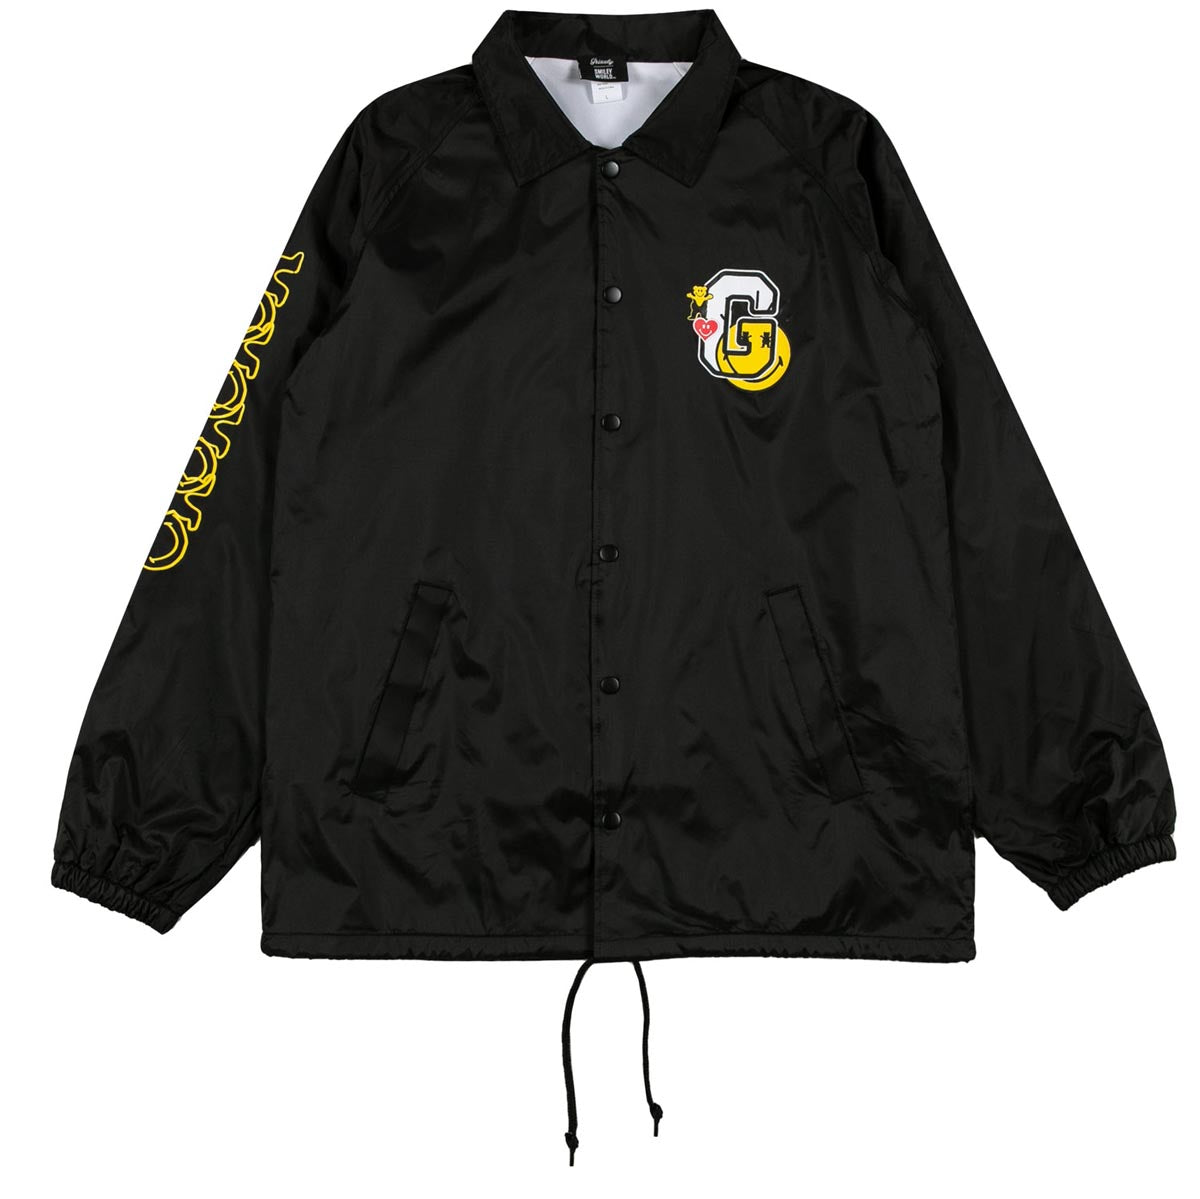 Grizzly x Smiley World Coach Jacket - Black image 1